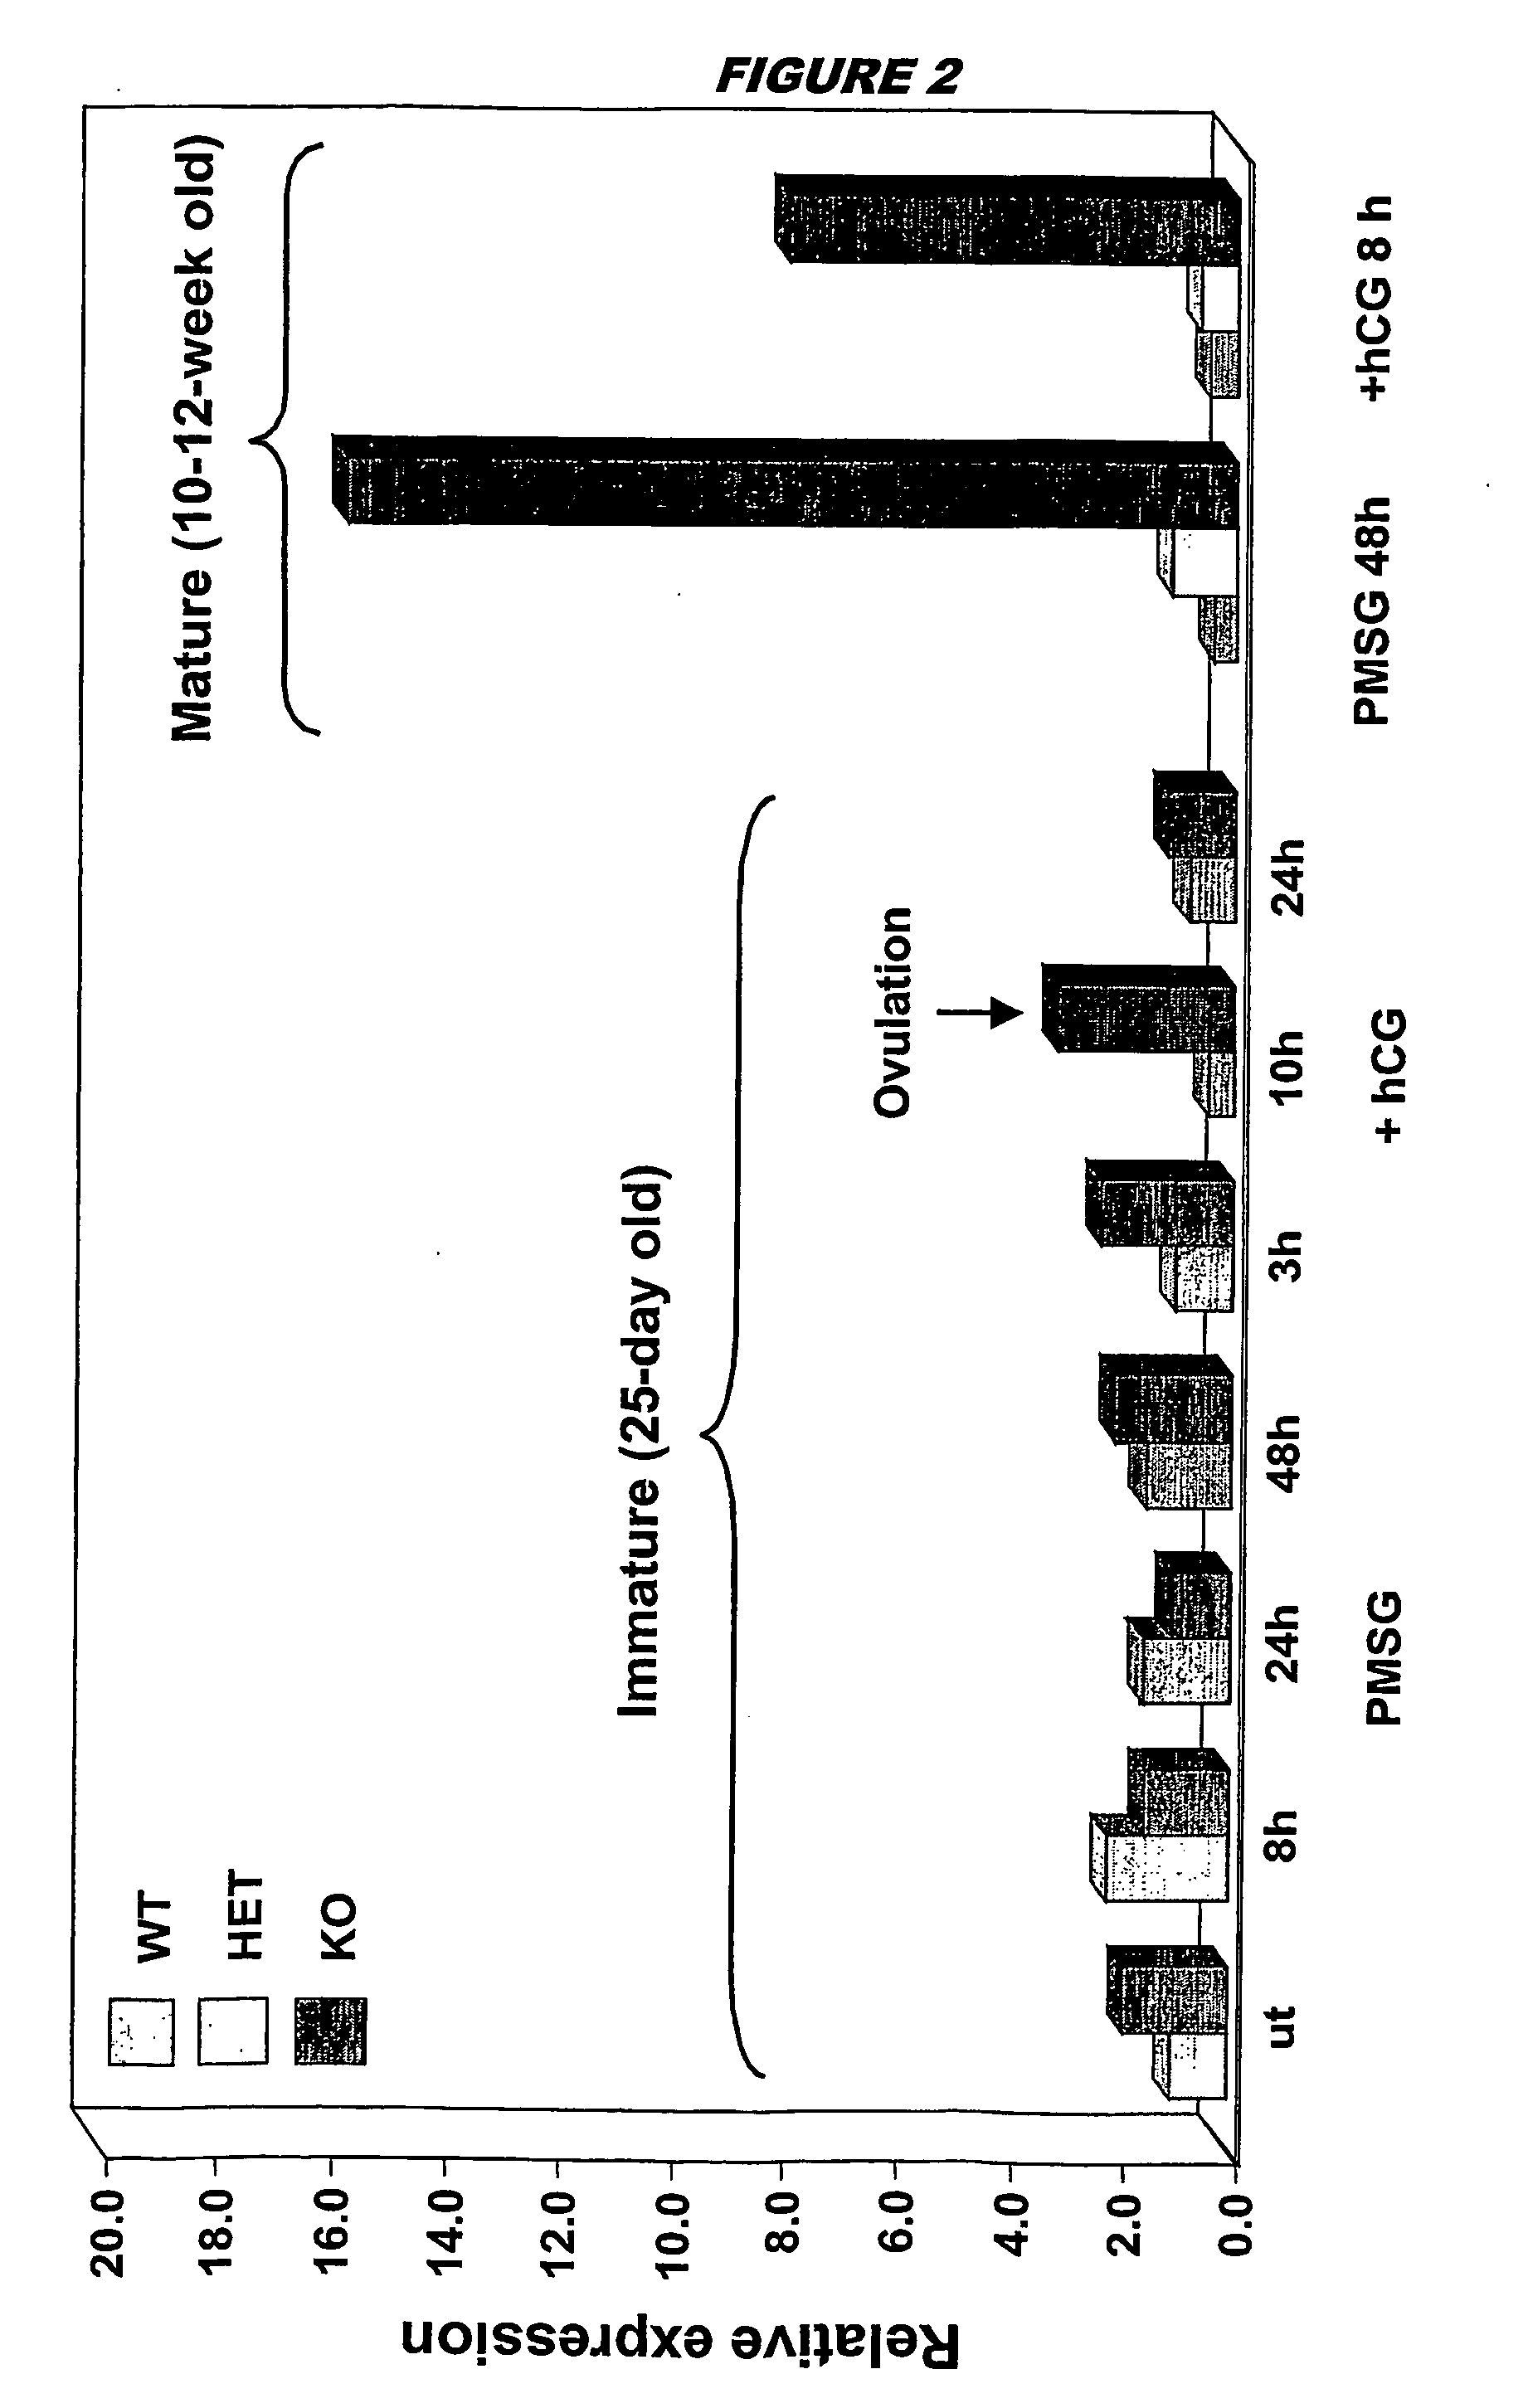 Screening for anti-ovulatory compounds